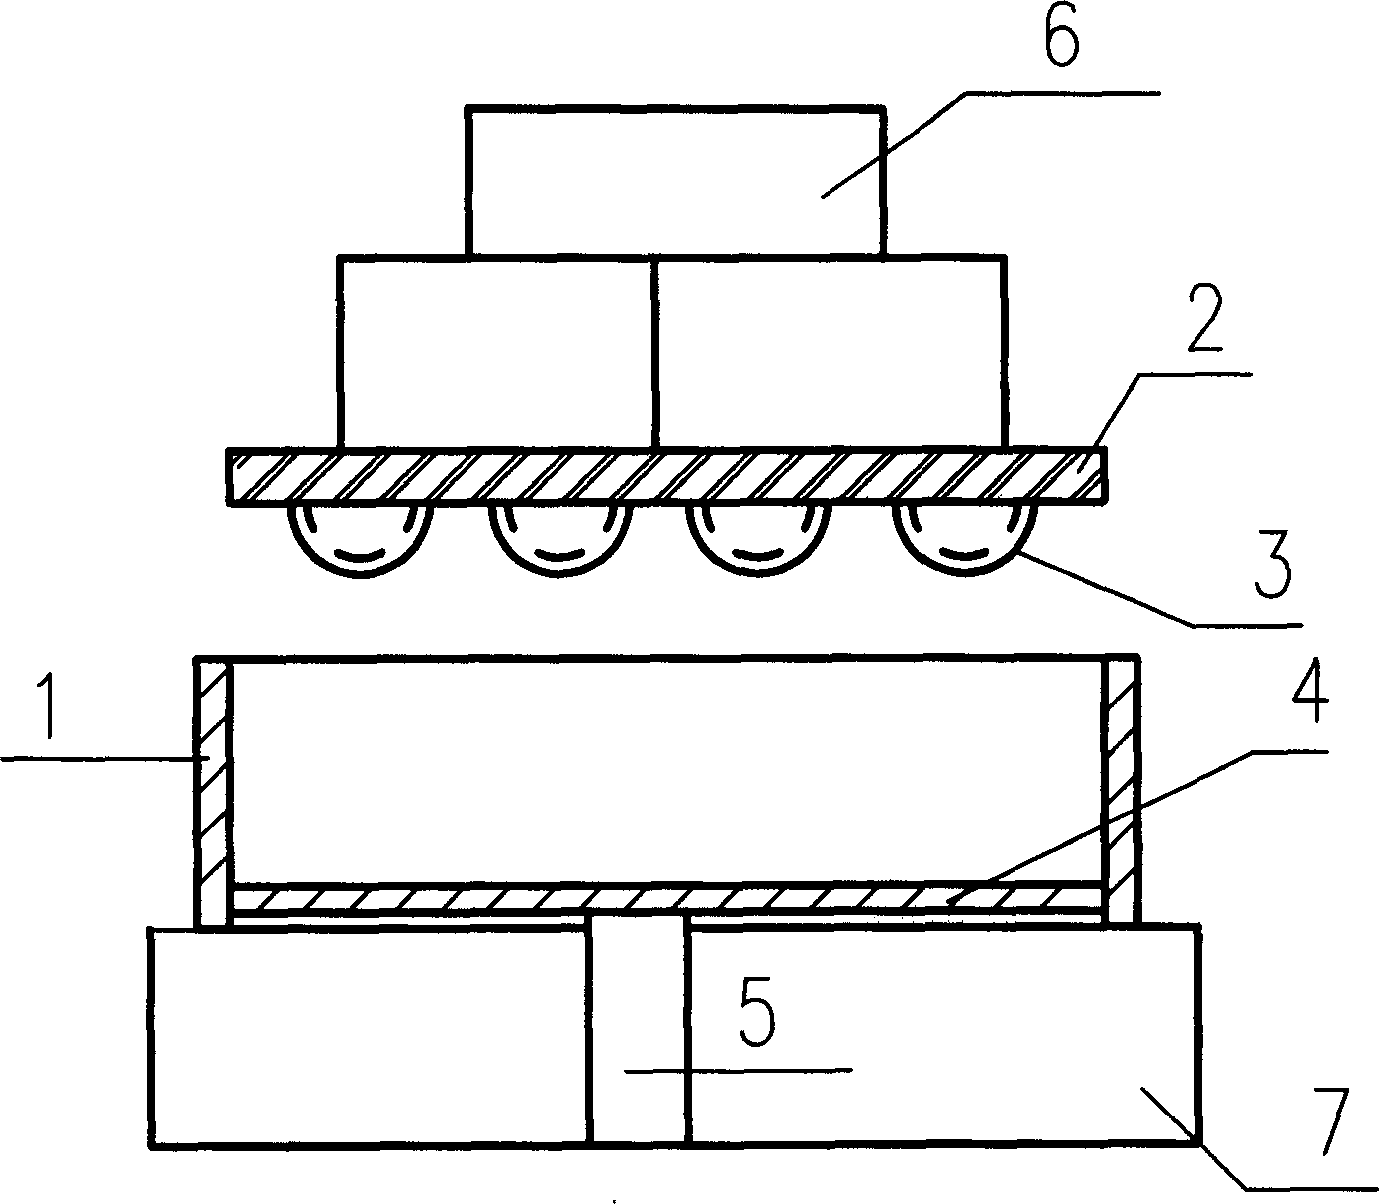 Air-entraining thermal insulation board and its producing method and special forming device